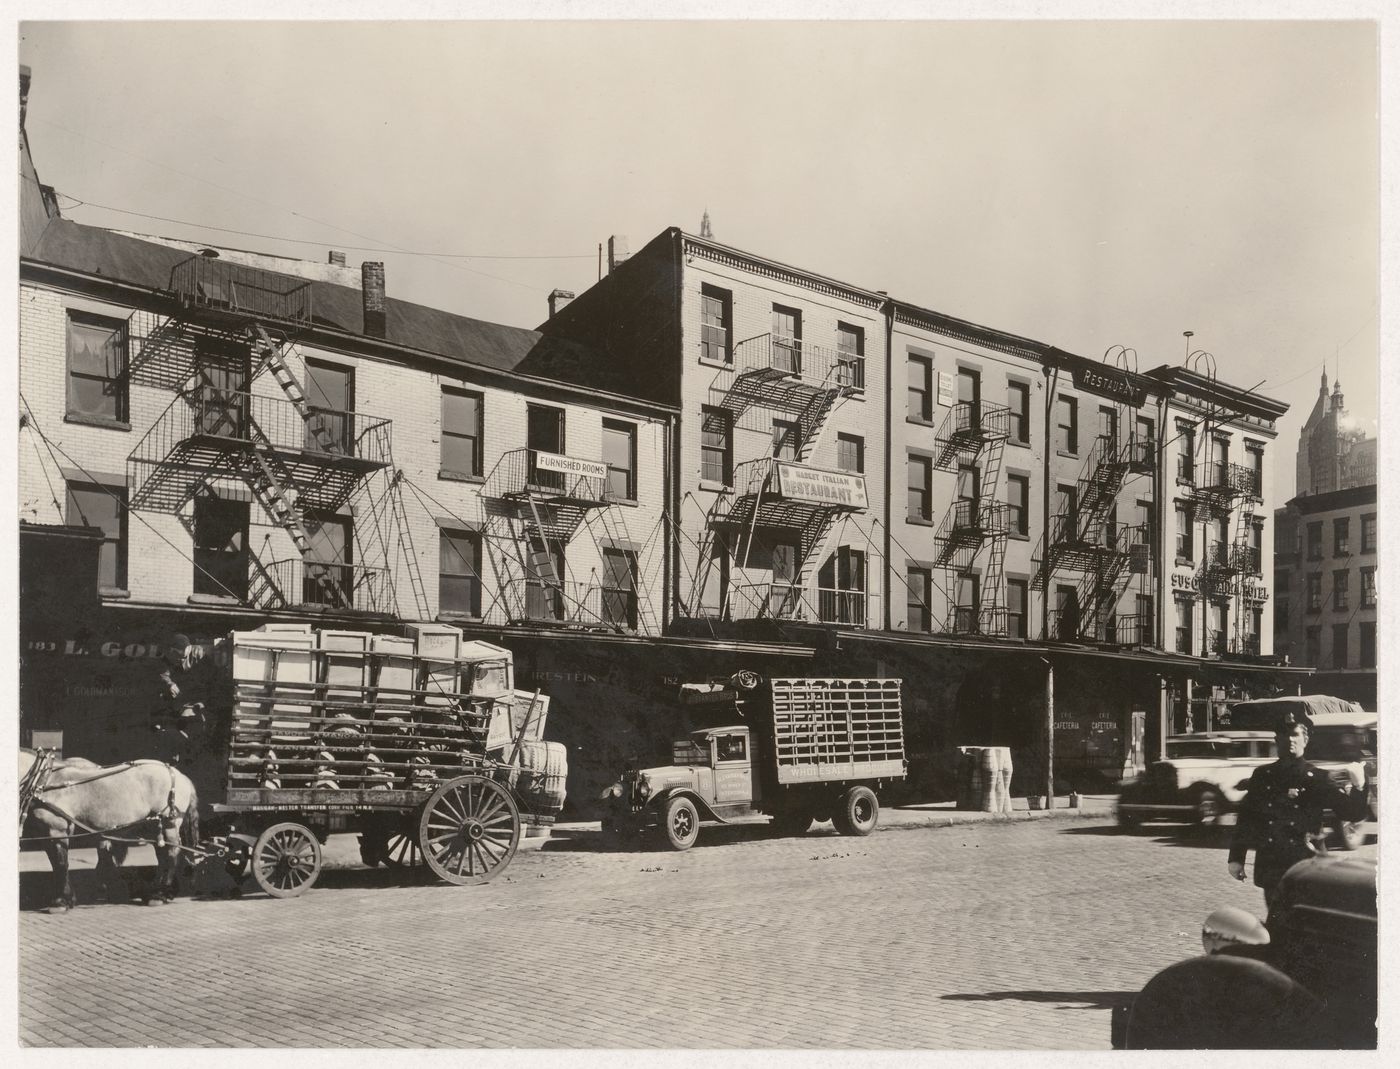 View of West Street between Warren and Chambers Streets, New York City, New York